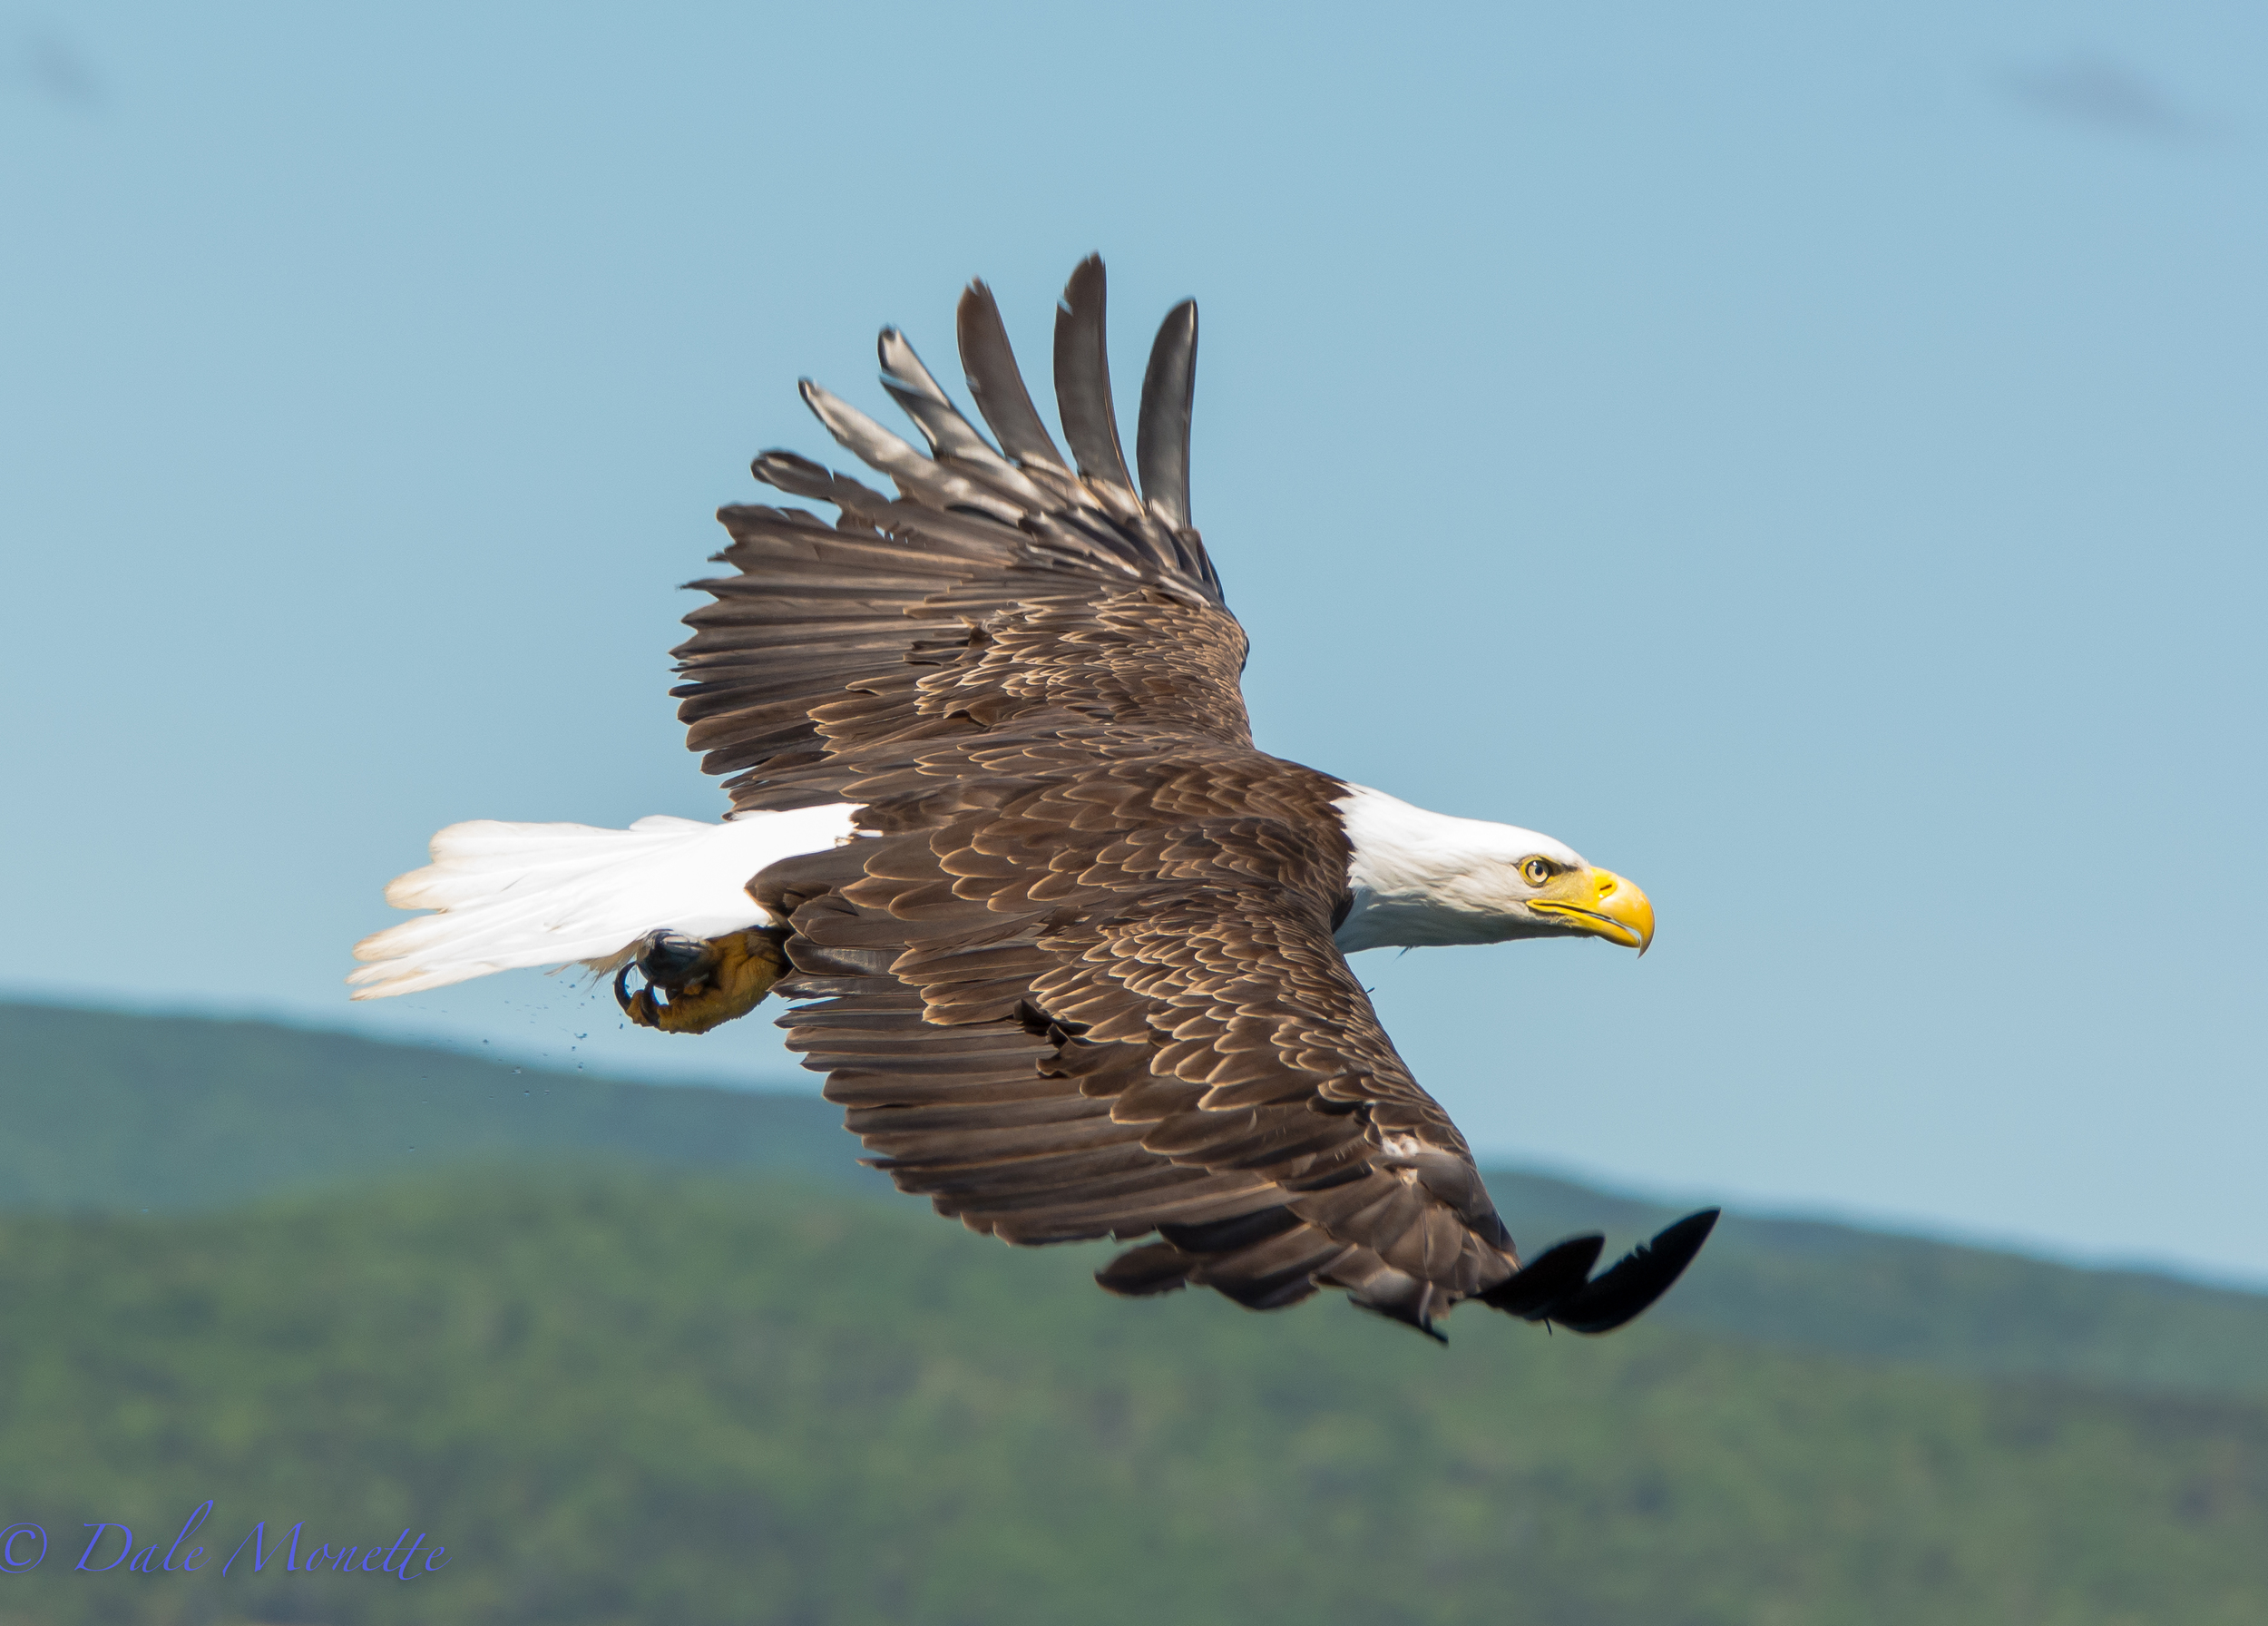   An adult bald eagle clutches a fish he just pulled out of Saint Anne's Bay on Cape Breton Island, Nova Scotia in June of 2015  